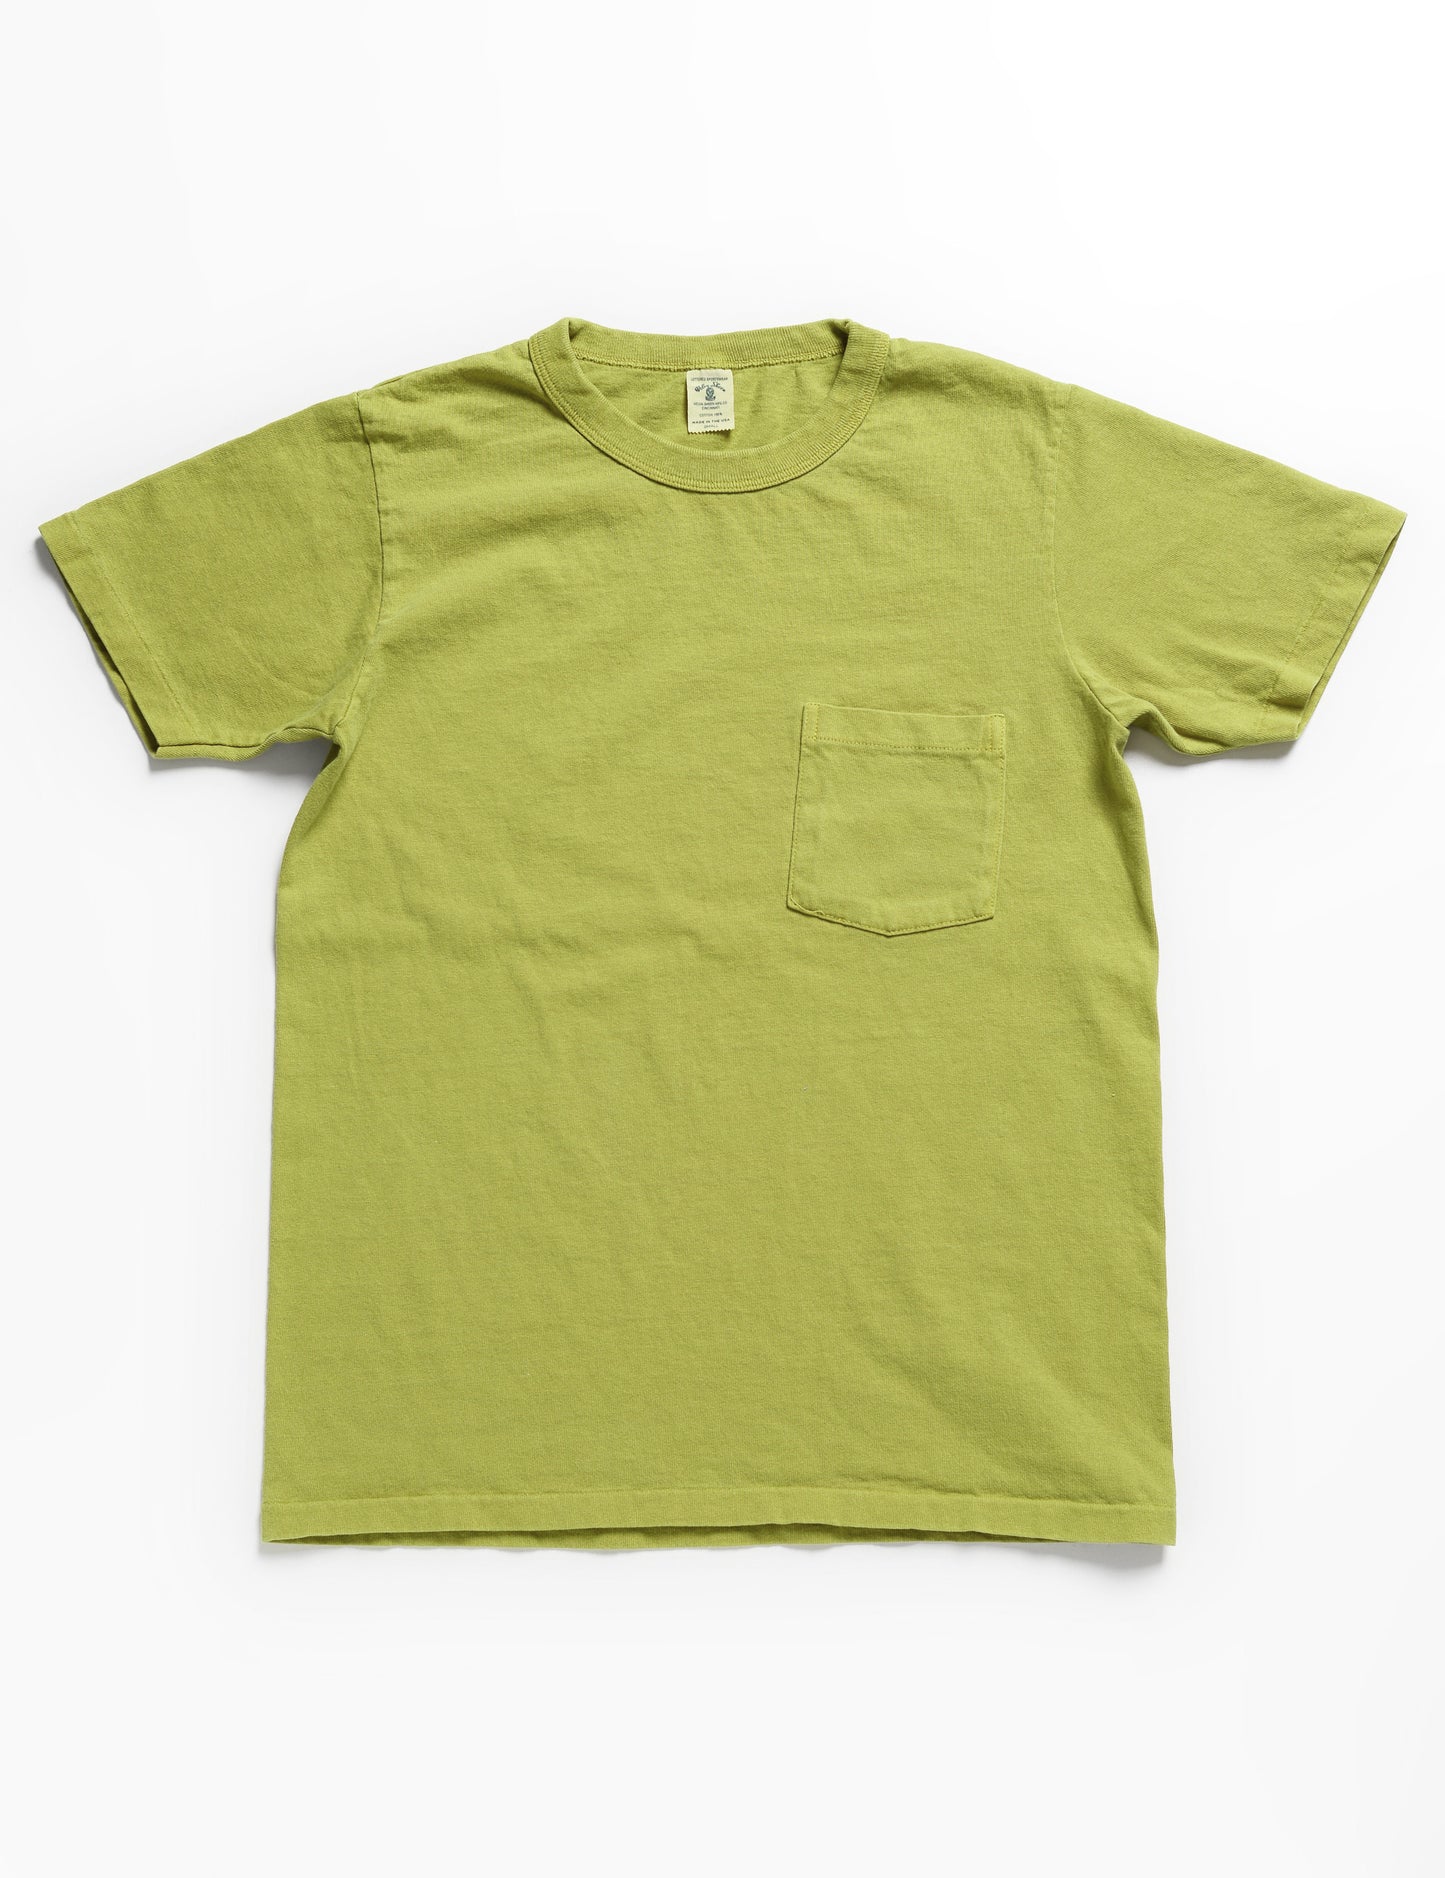 Pigment Pocket Tee in Lime